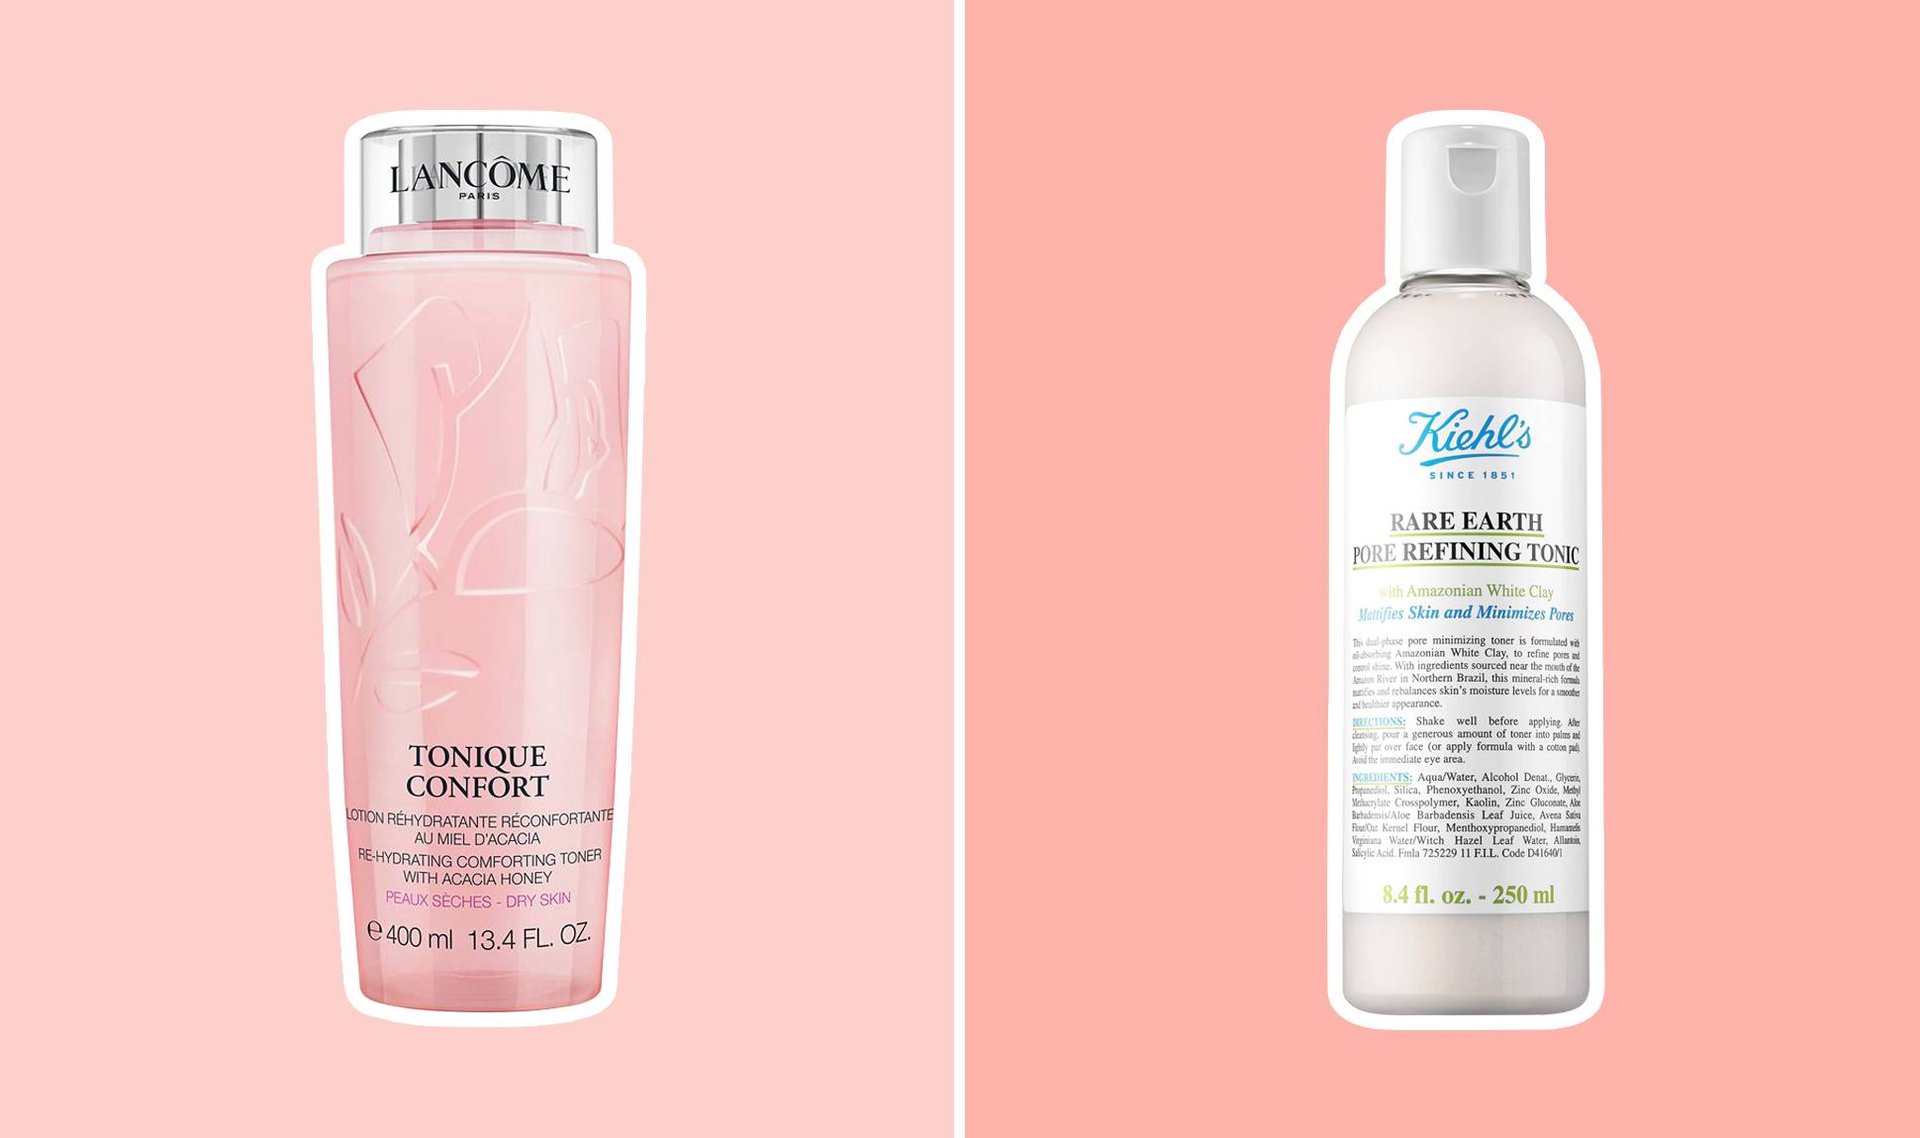 Toner vs. Tonic: What’s the Difference?